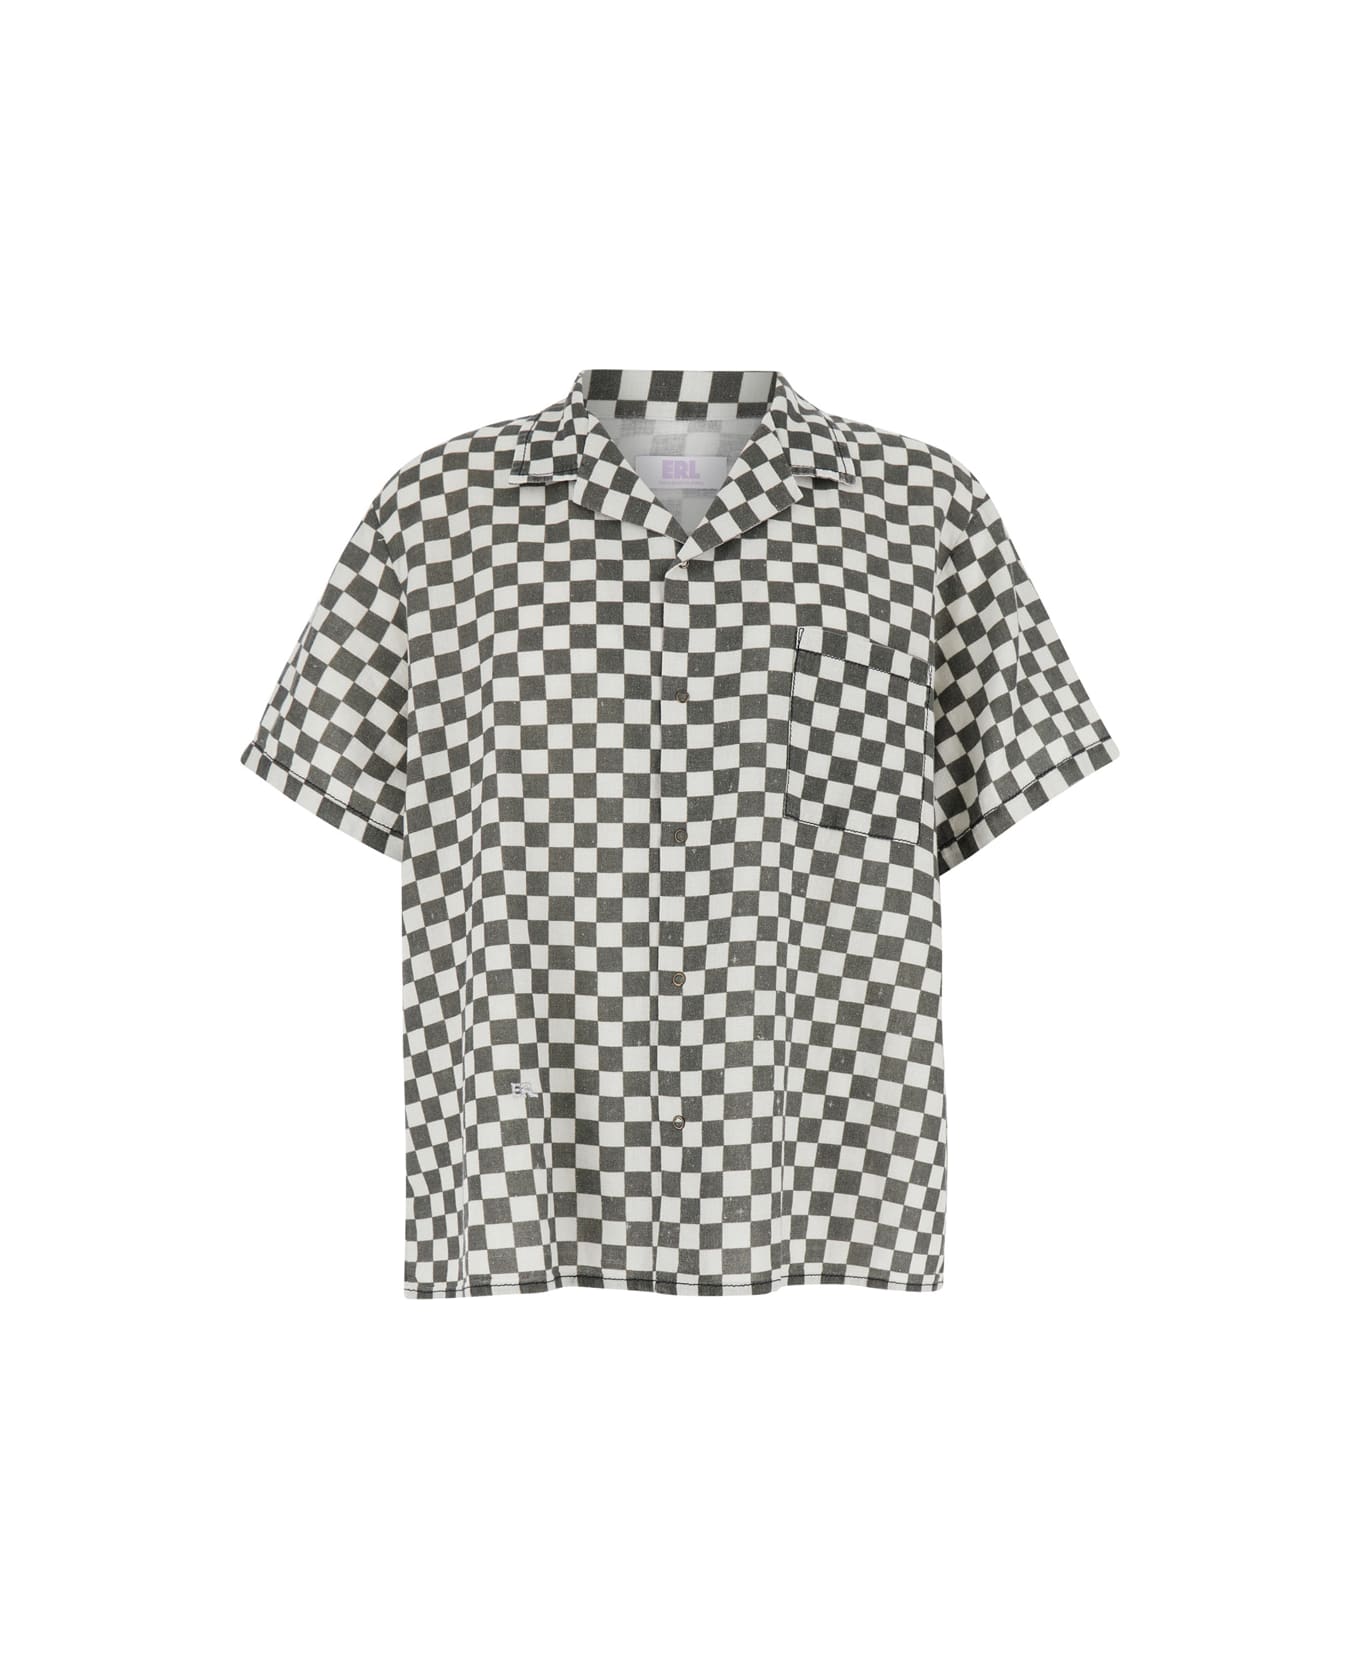 ERL Black And White Bowling Shirt With Check Motif In Cotton And Linen Man - Grey